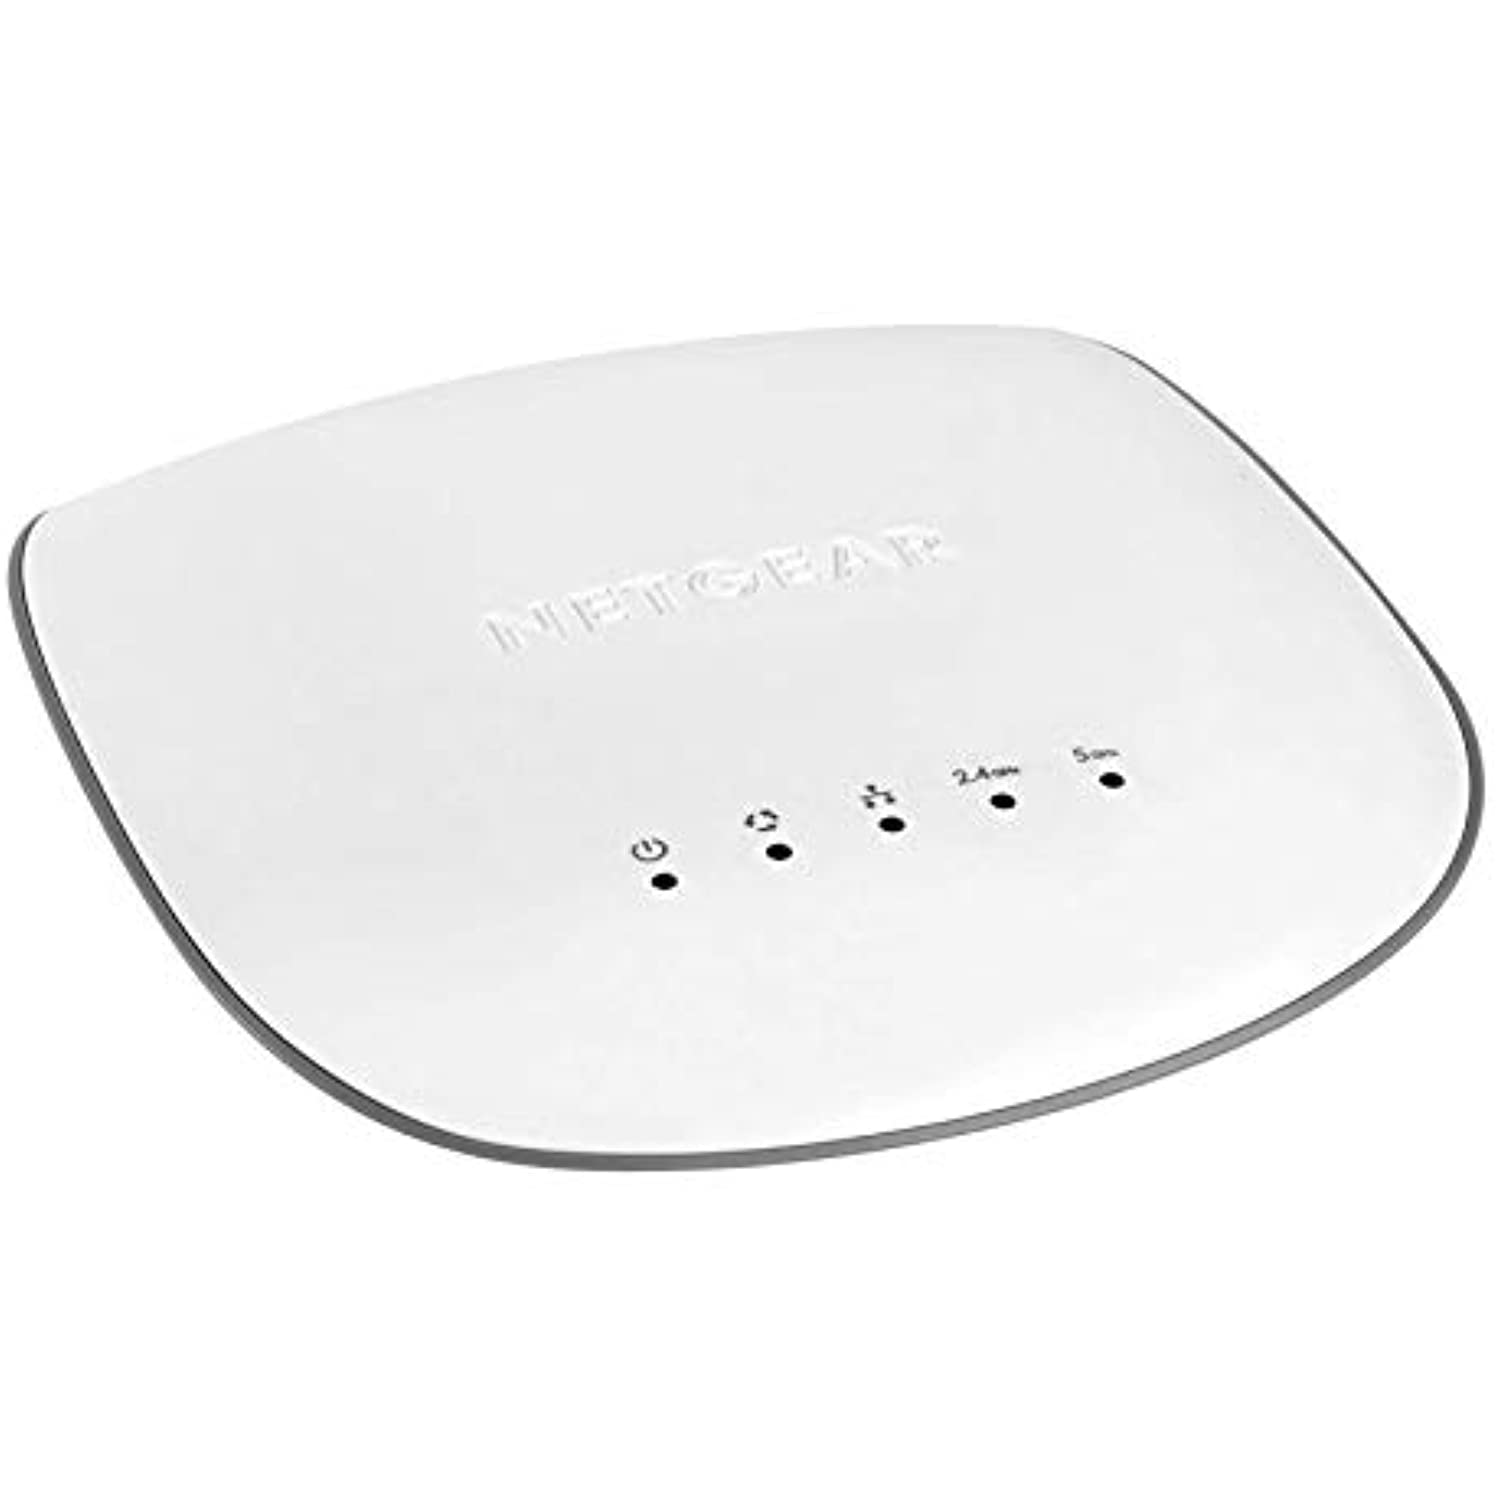 Access - Point Insight Plus Safety Fire NETGEAR WiFi and